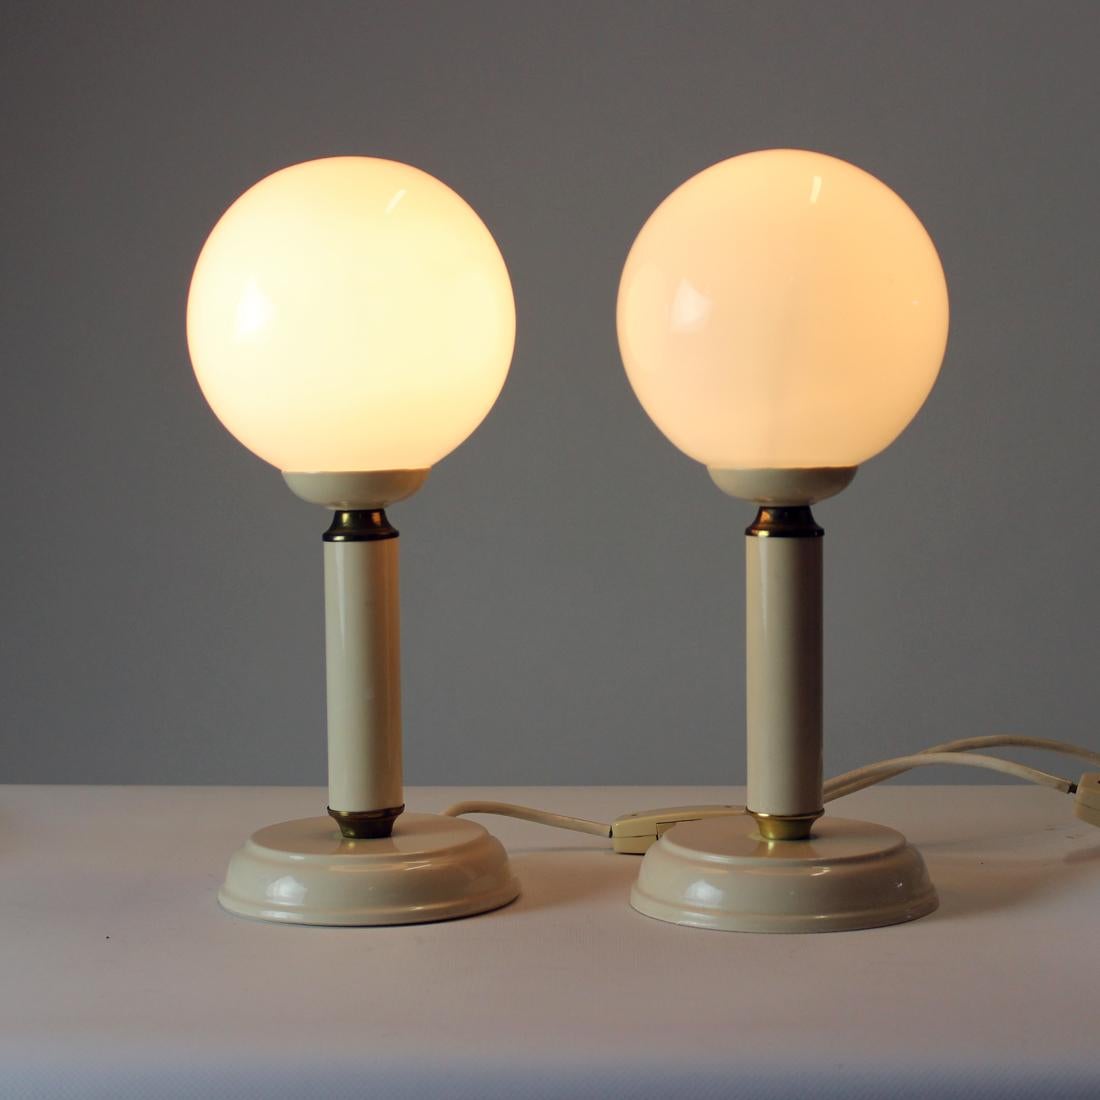 Set of two elegant table lamps, produced in Czechoslovakia in 1970s. The lamps stand on metal base in cream colored glaze with brass details. The shield is made out of a white opaline glass. The design is elegant and simple and makes the lights a